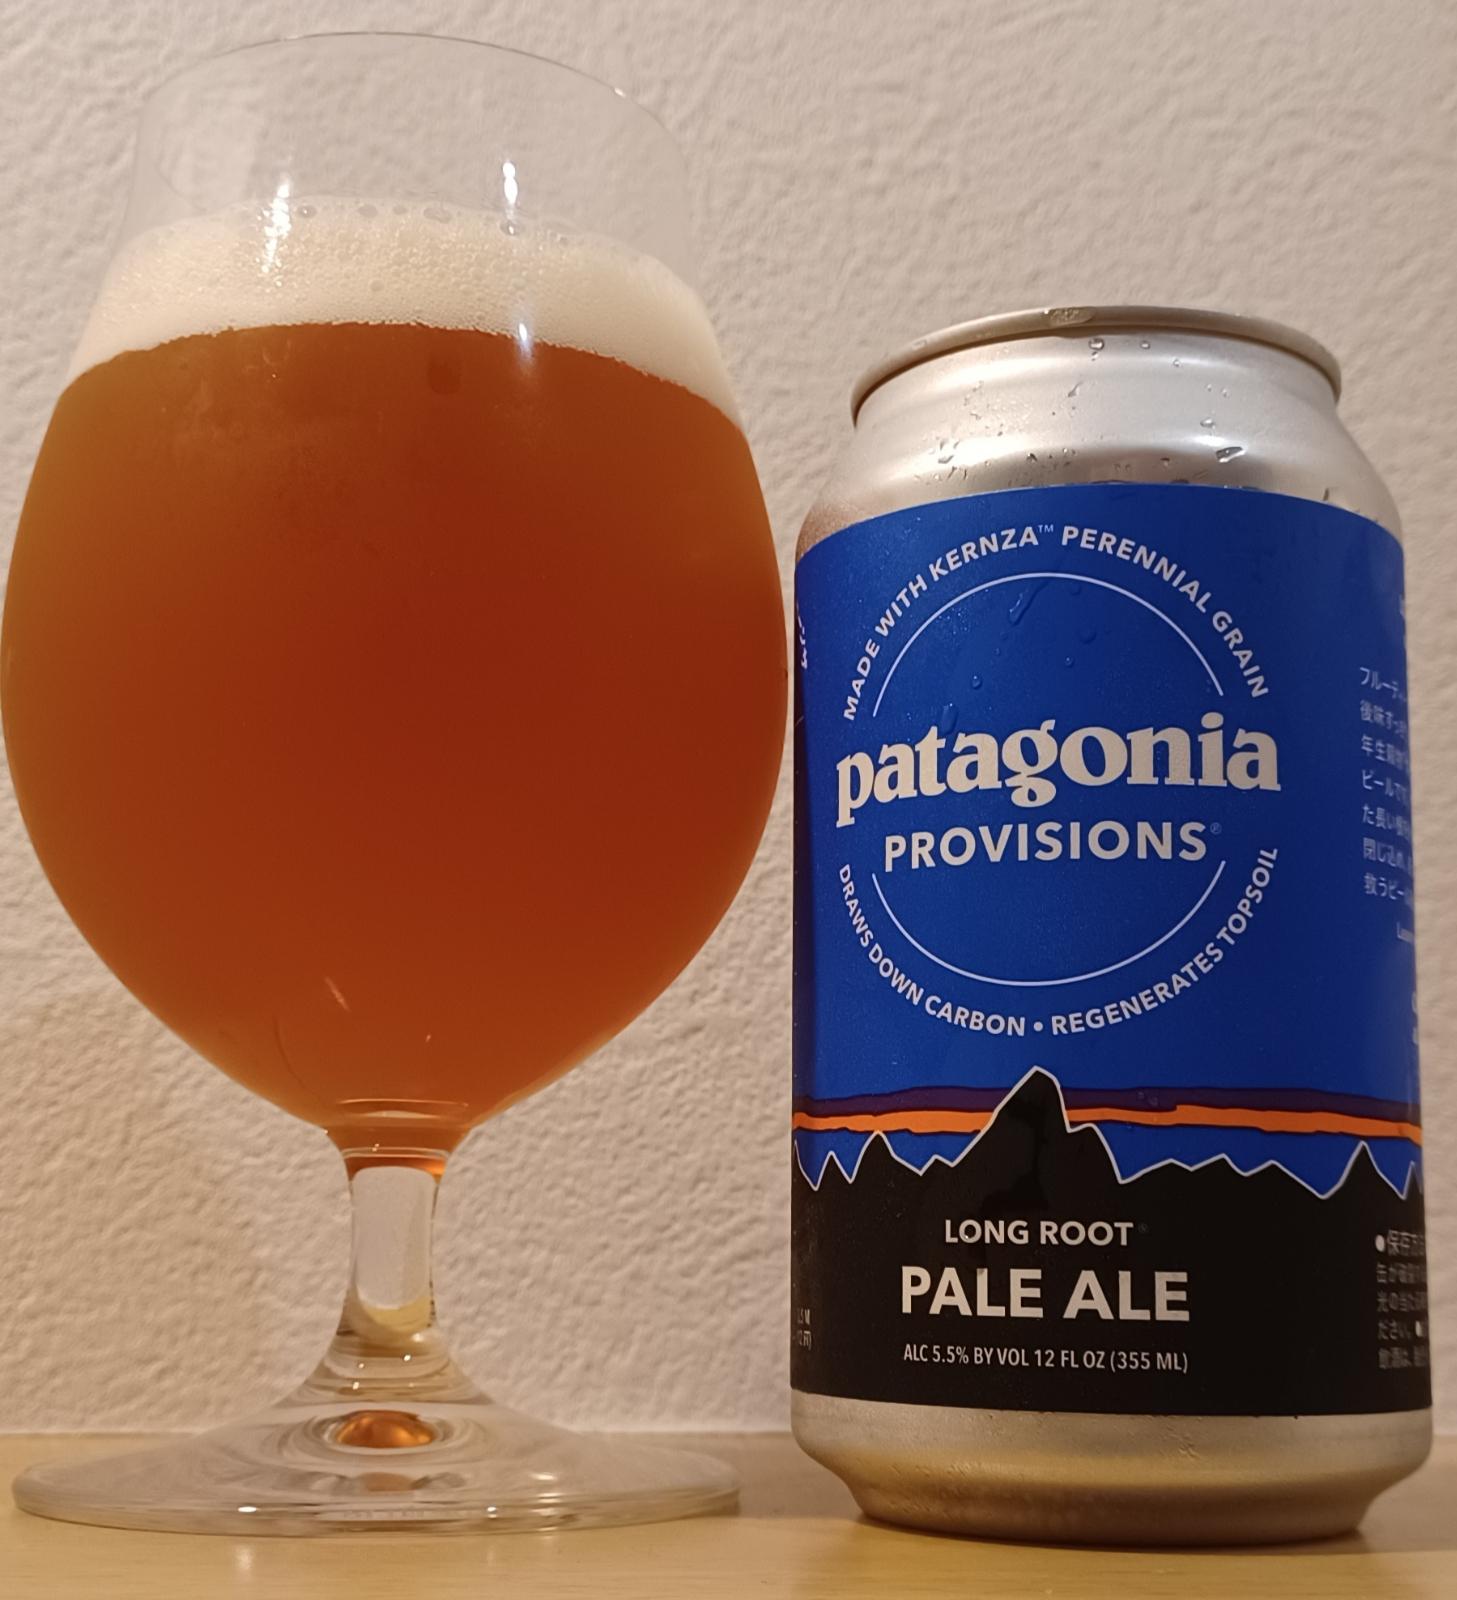 Patagonia Provisions Long Root Pale Ale